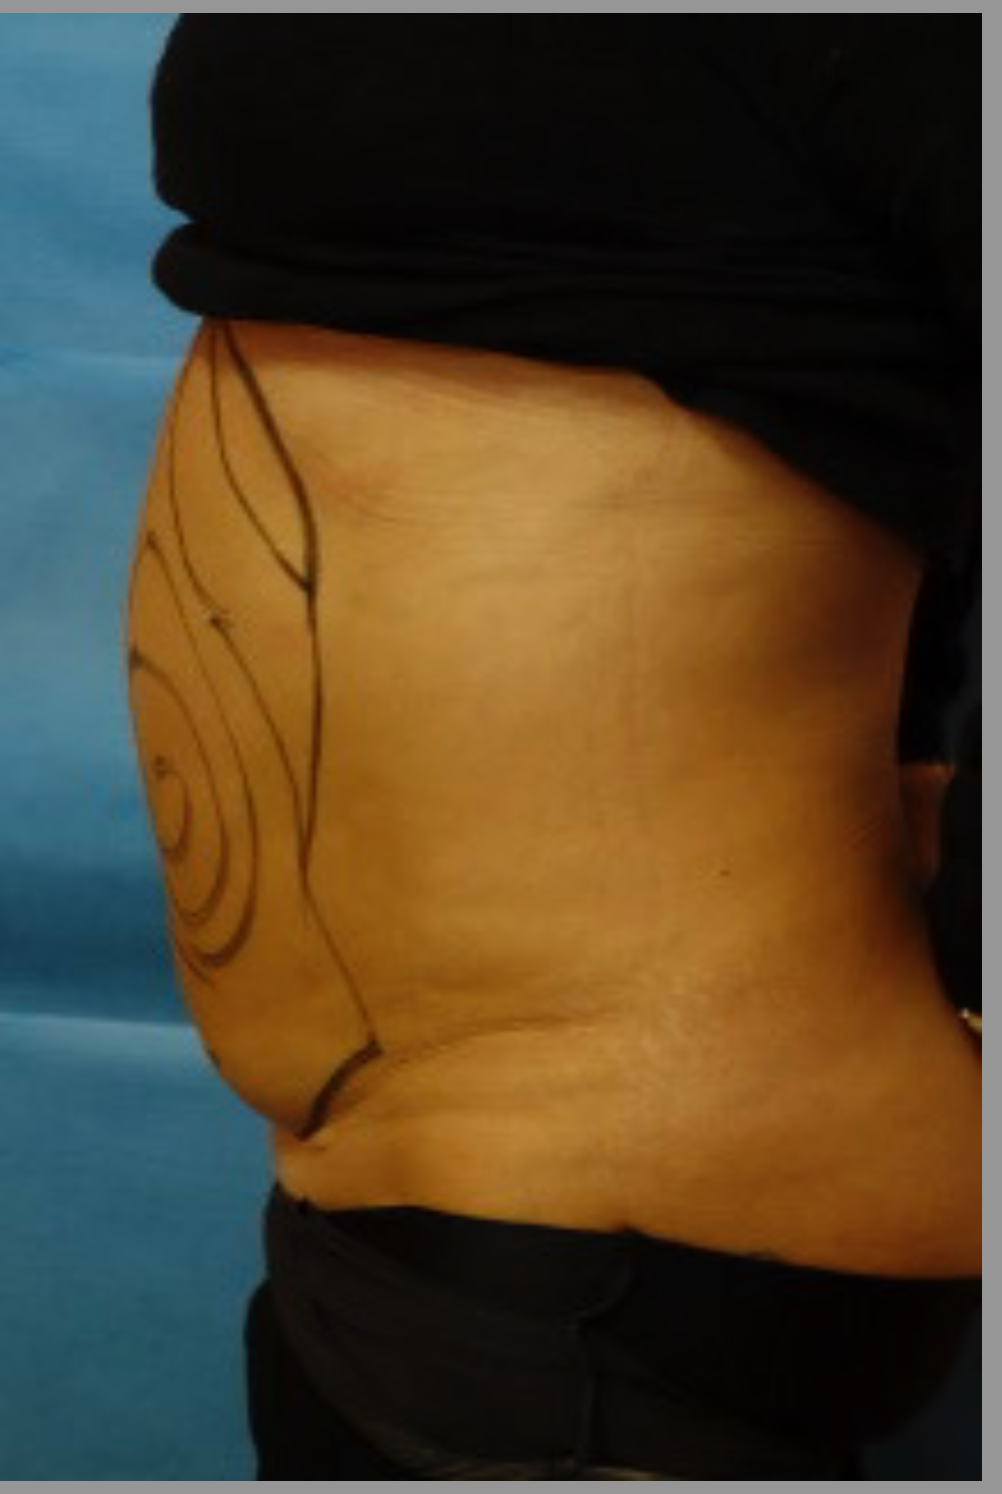 A woman 's stomach with a line drawn on it